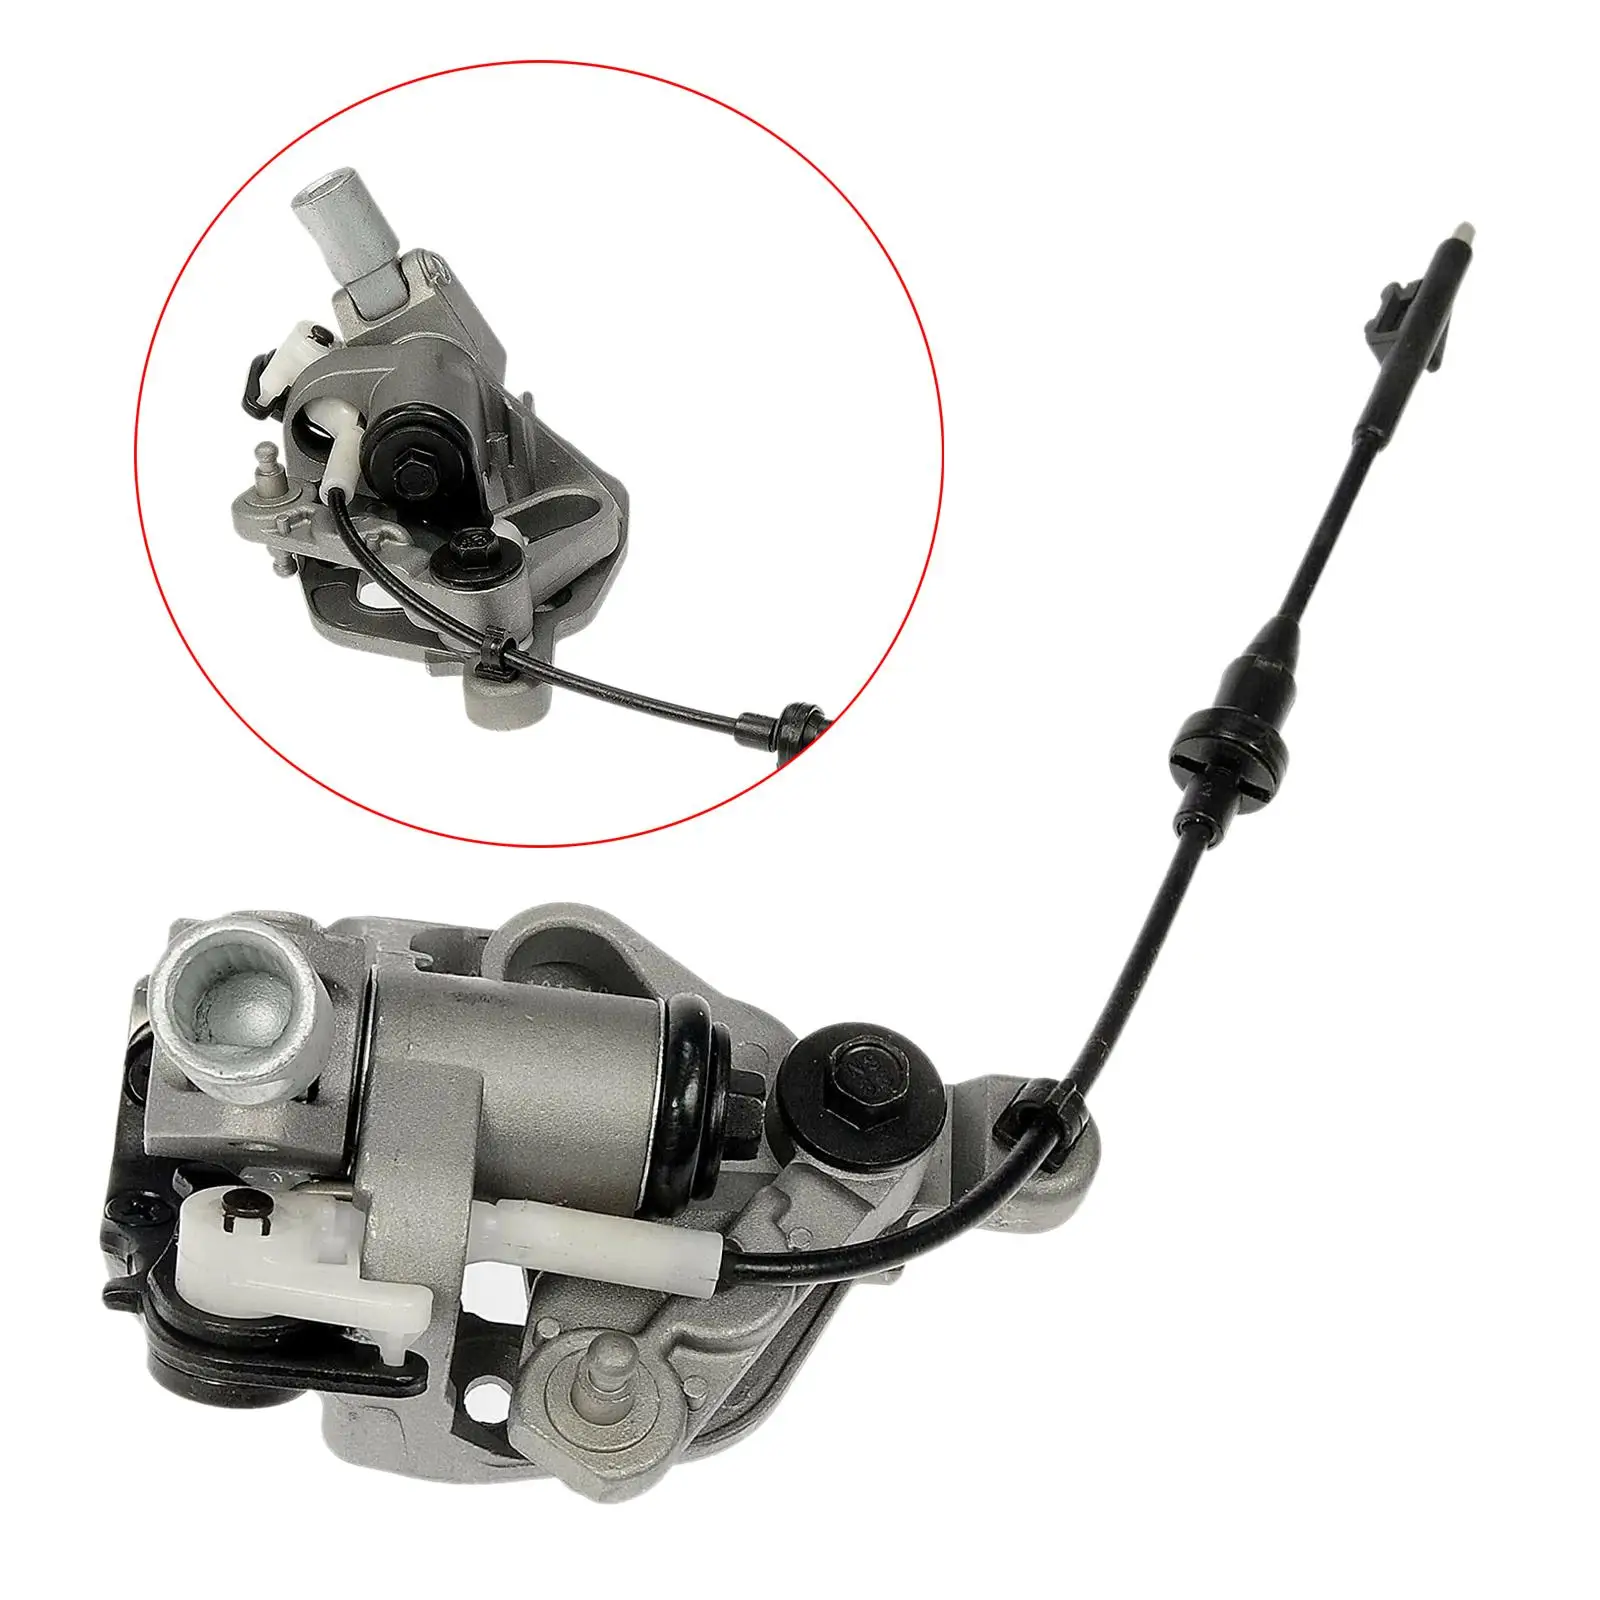 Steering Column Shift Control Mechanism 26091246 905-101 Repair Parts Professional Automatic Transmission Control for Chevy